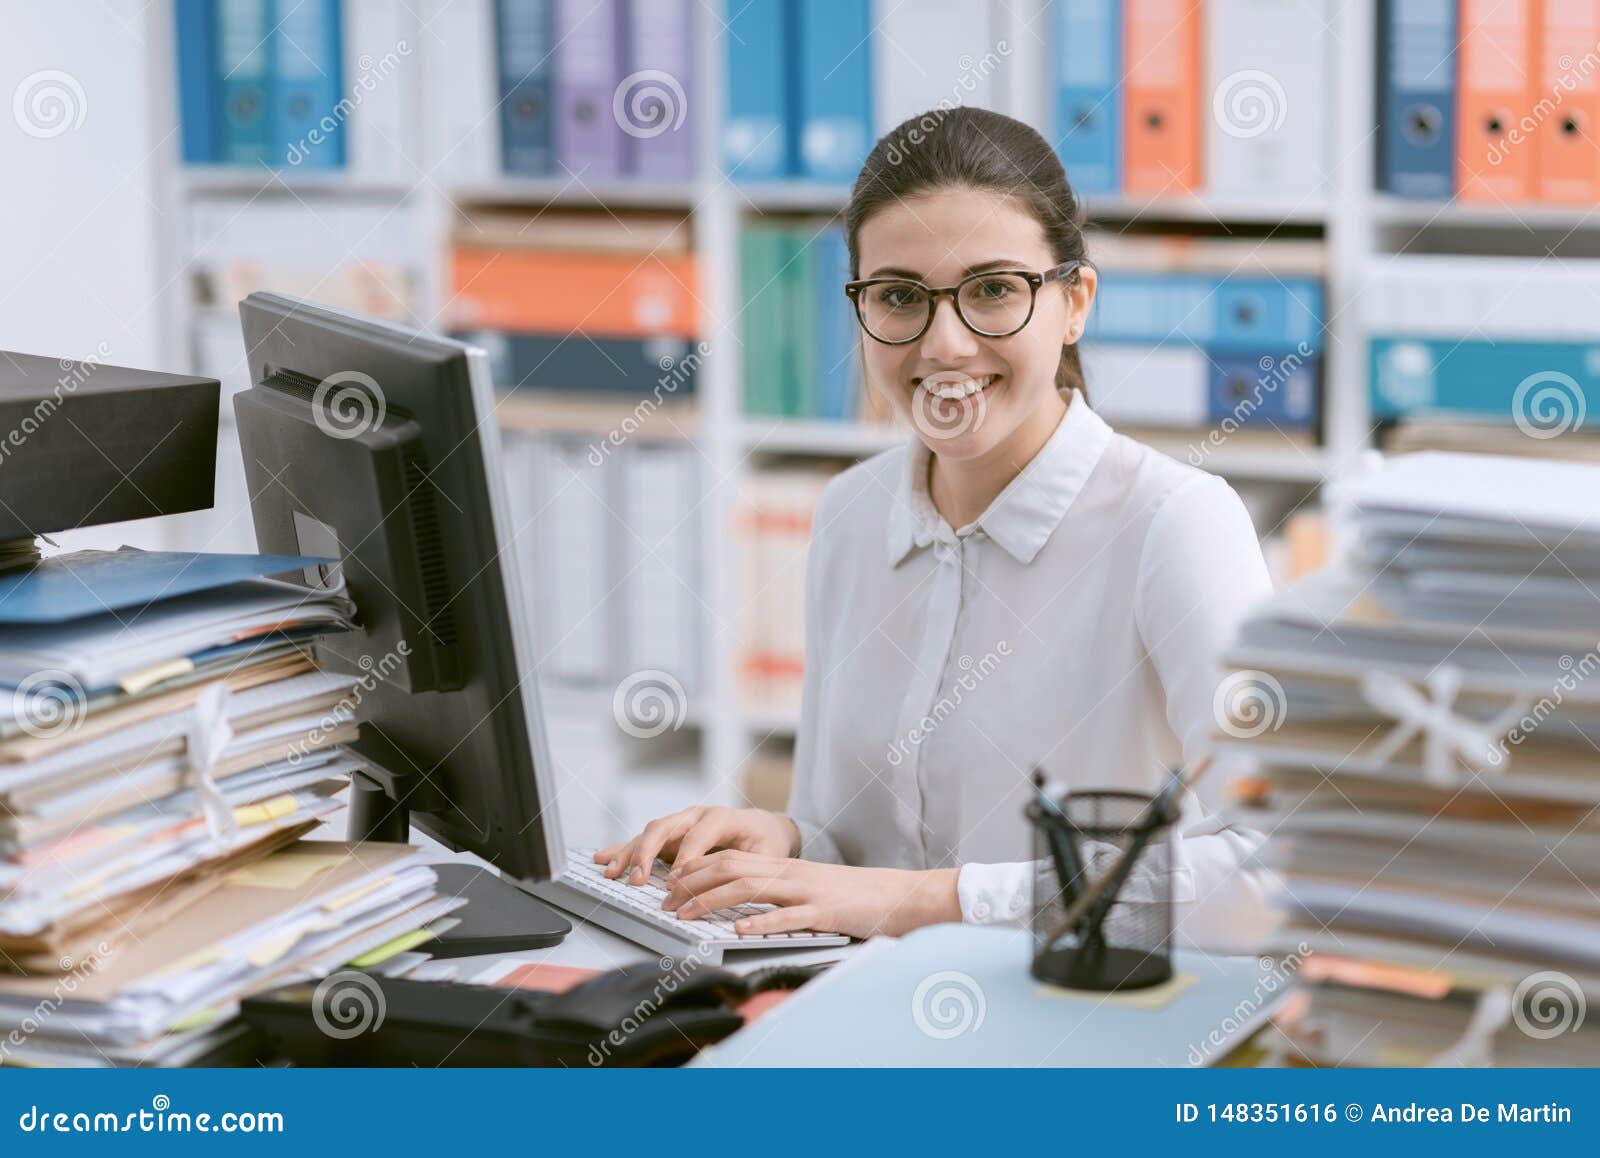 young secretary working and smiling